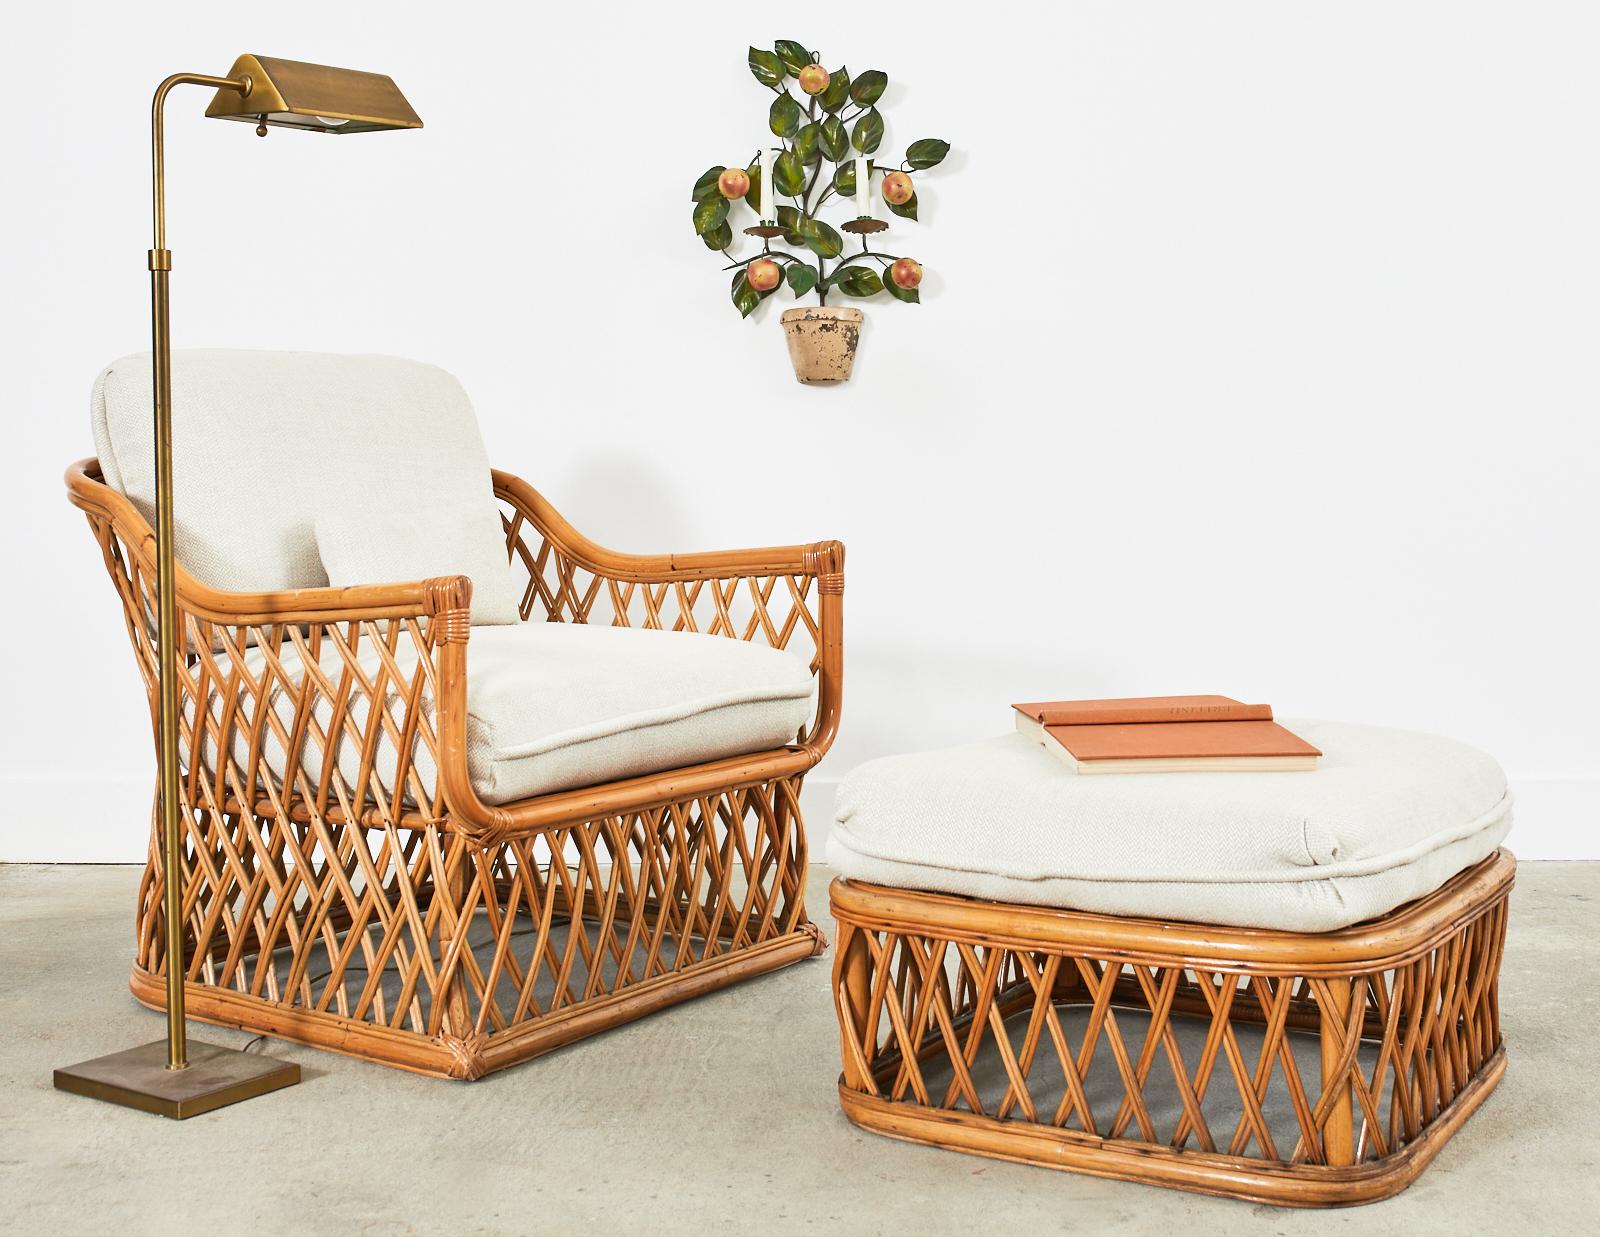 Attractive mid-century Italian organic modern lounge chair and matching ottoman. The lounge chair features a bamboo frame with geometric woven lattice sides and back constructed from pencil reed rattan. The barrel form back gracefully curves down to